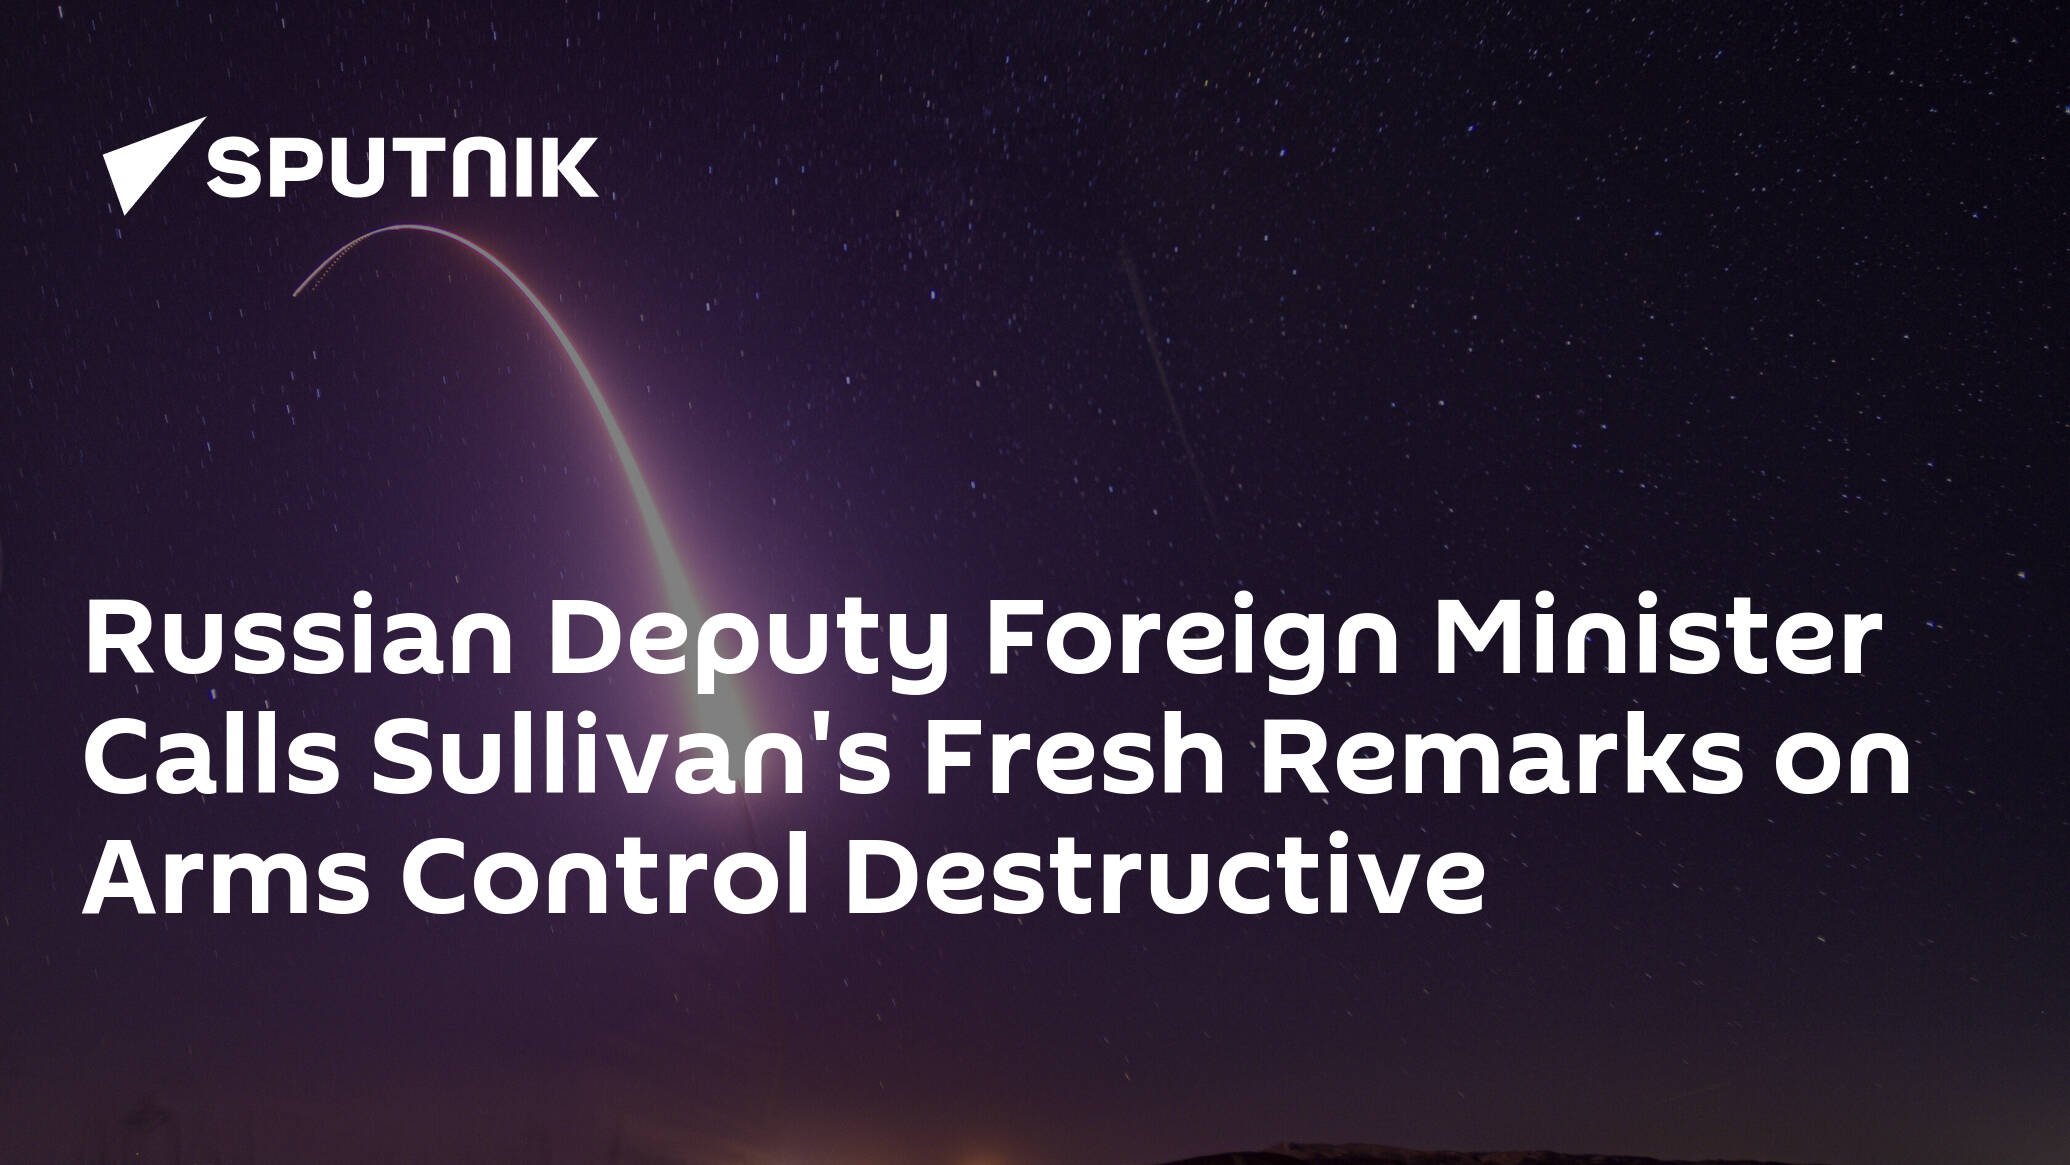 Russian Deputy Foreign Minister Calls Sullivan's Fresh Remarks on Arms Control Destructive